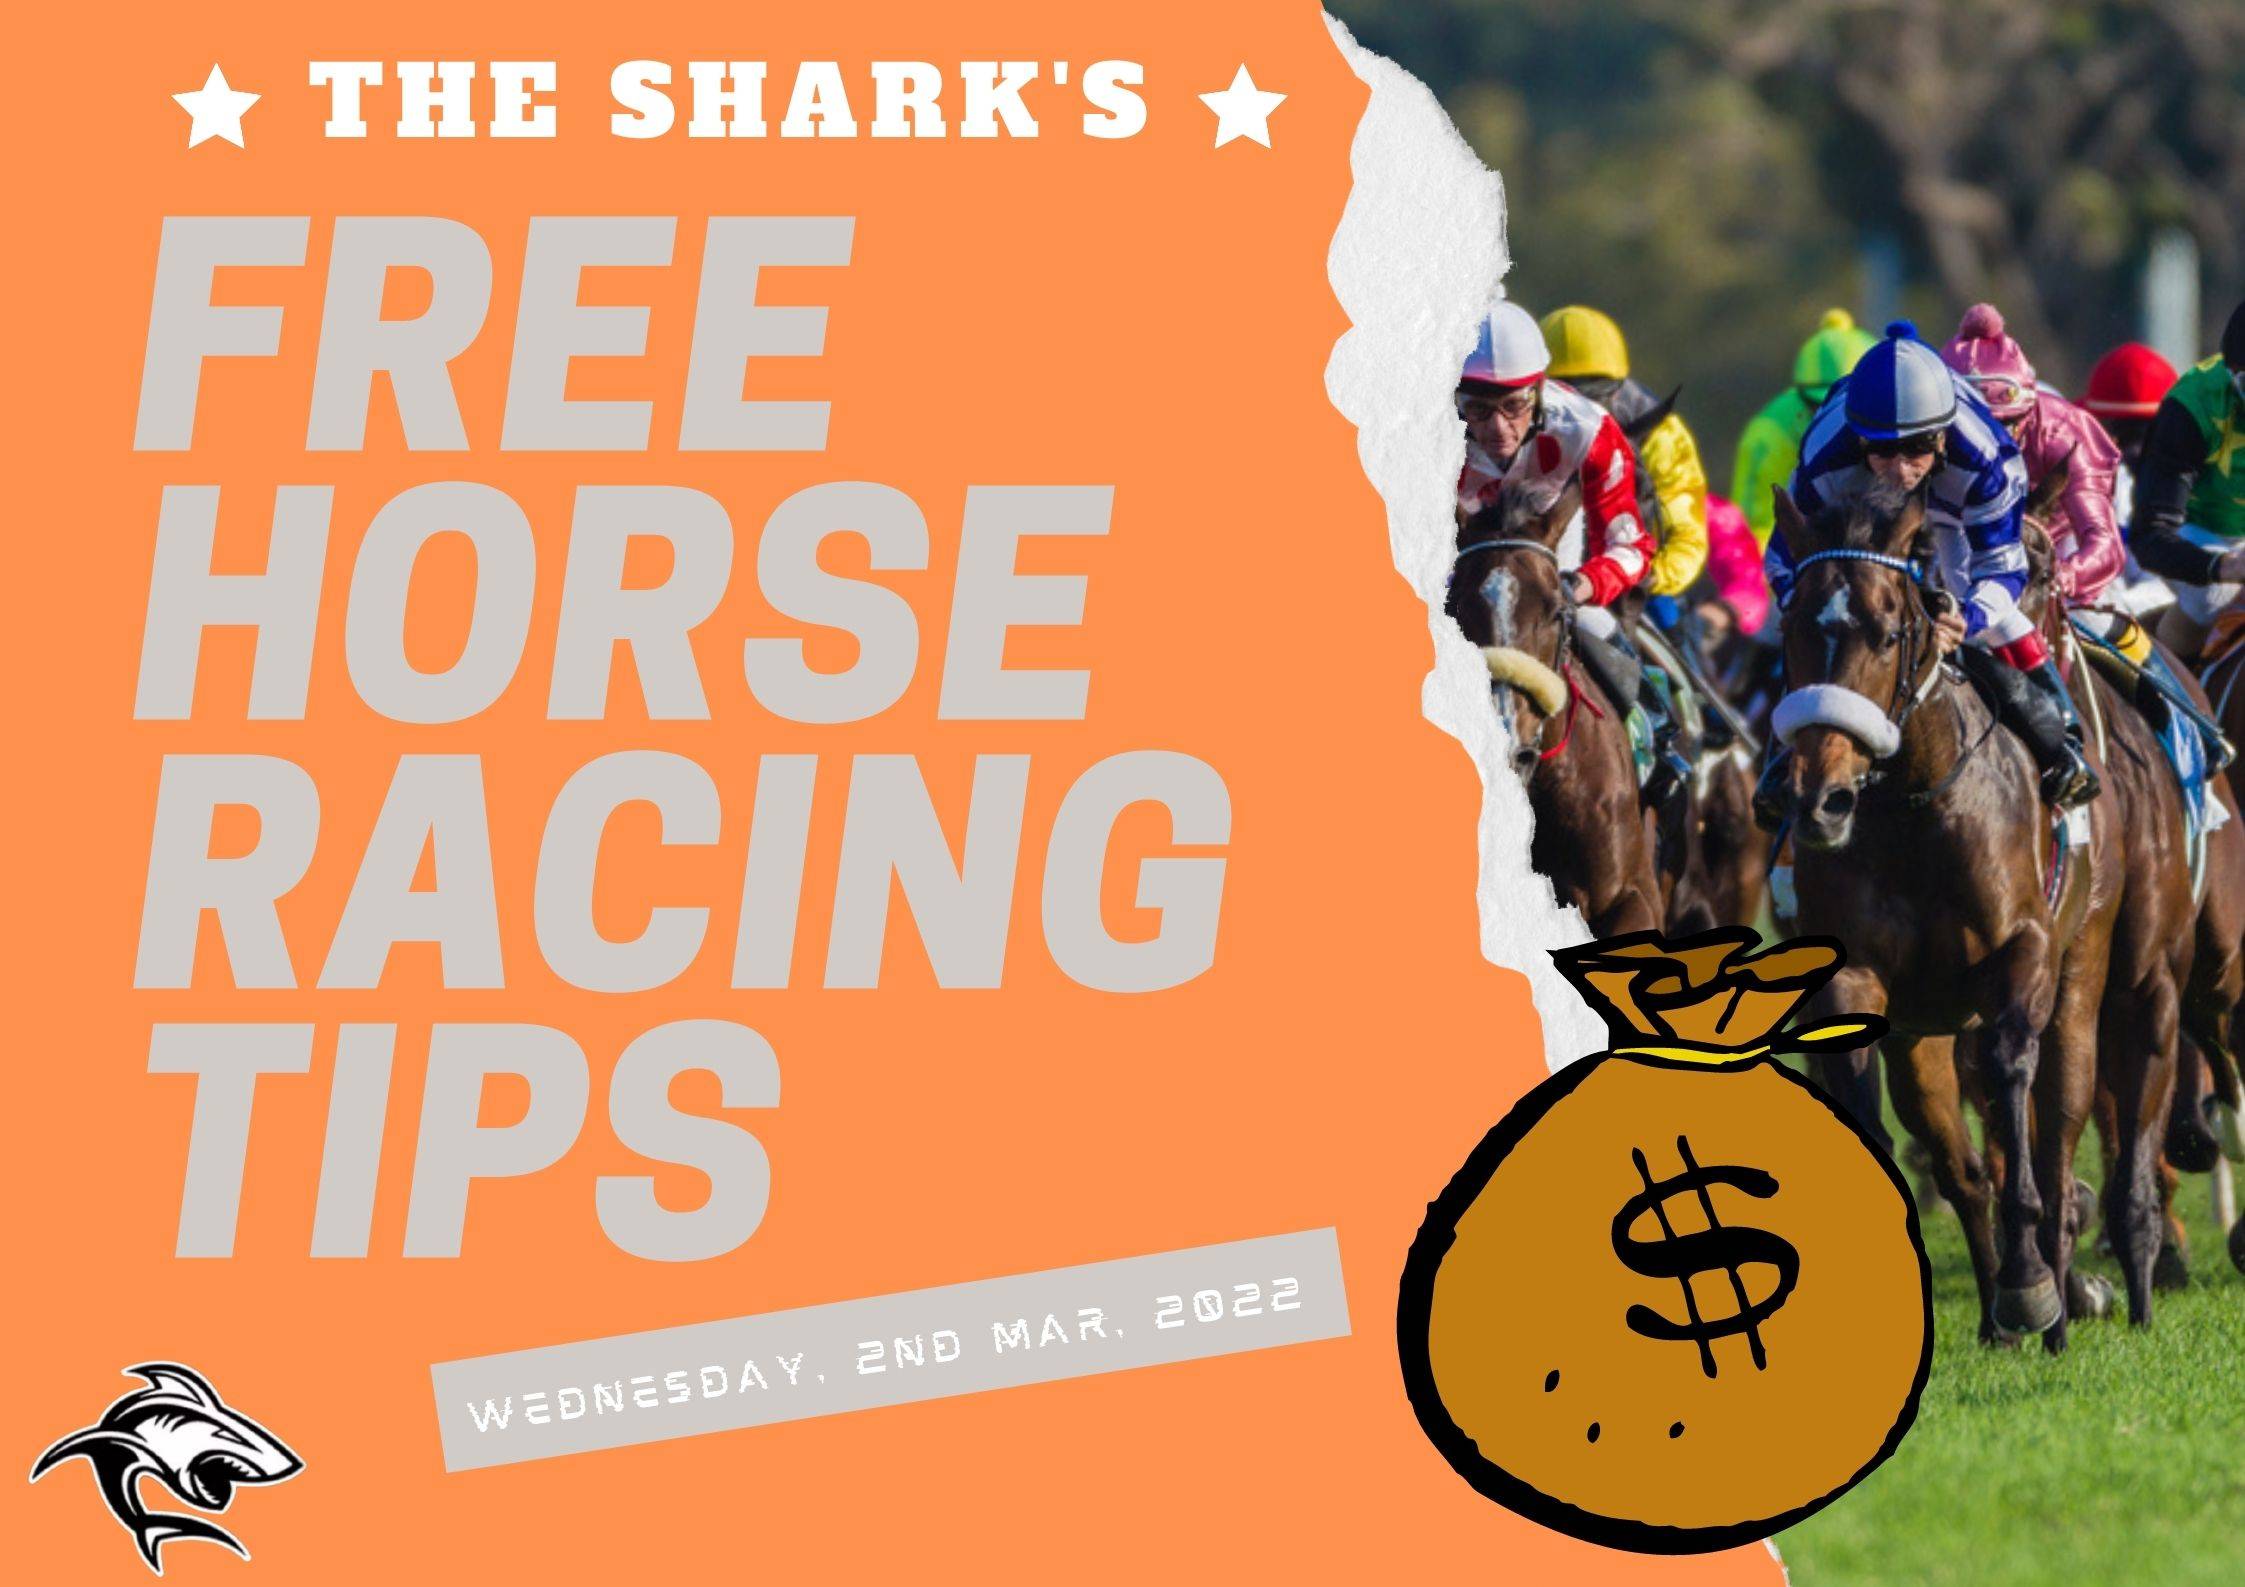 Free Horse Racing Tips - 2nd Mar